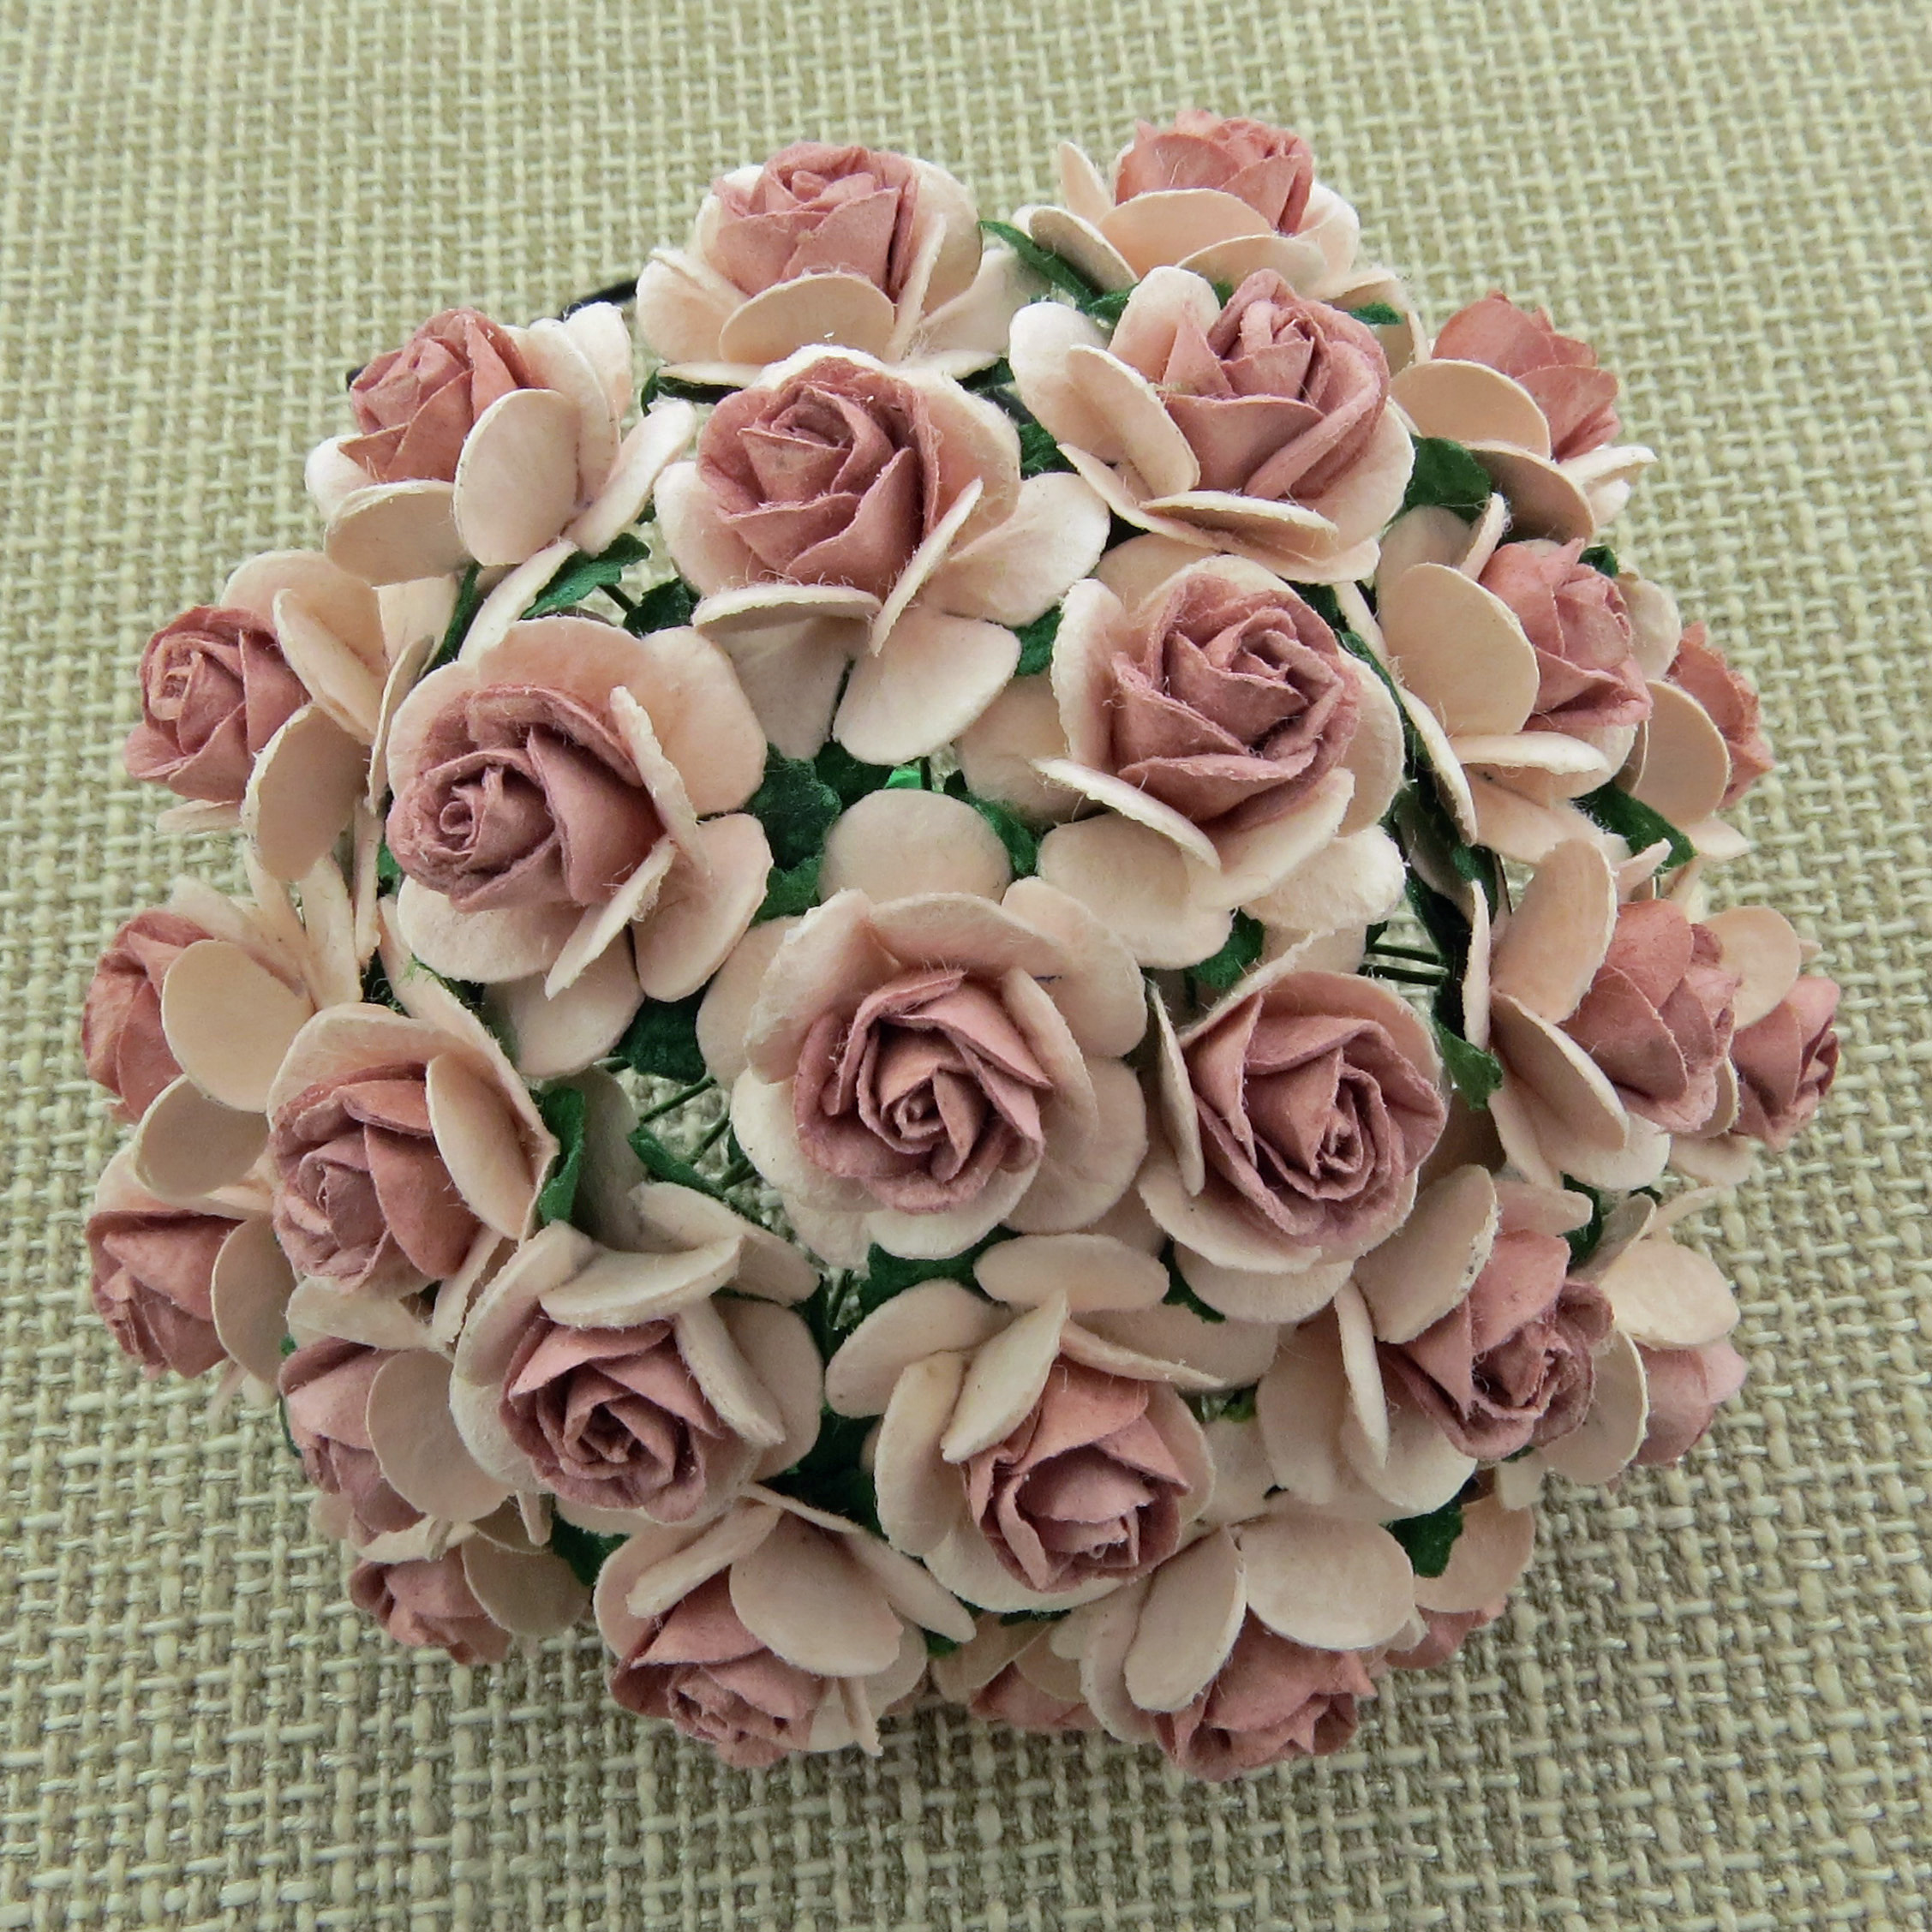 100 2-TONE PINK WITH DUSKY PINK CENTRE MULBERRY PAPER OPEN ROSES